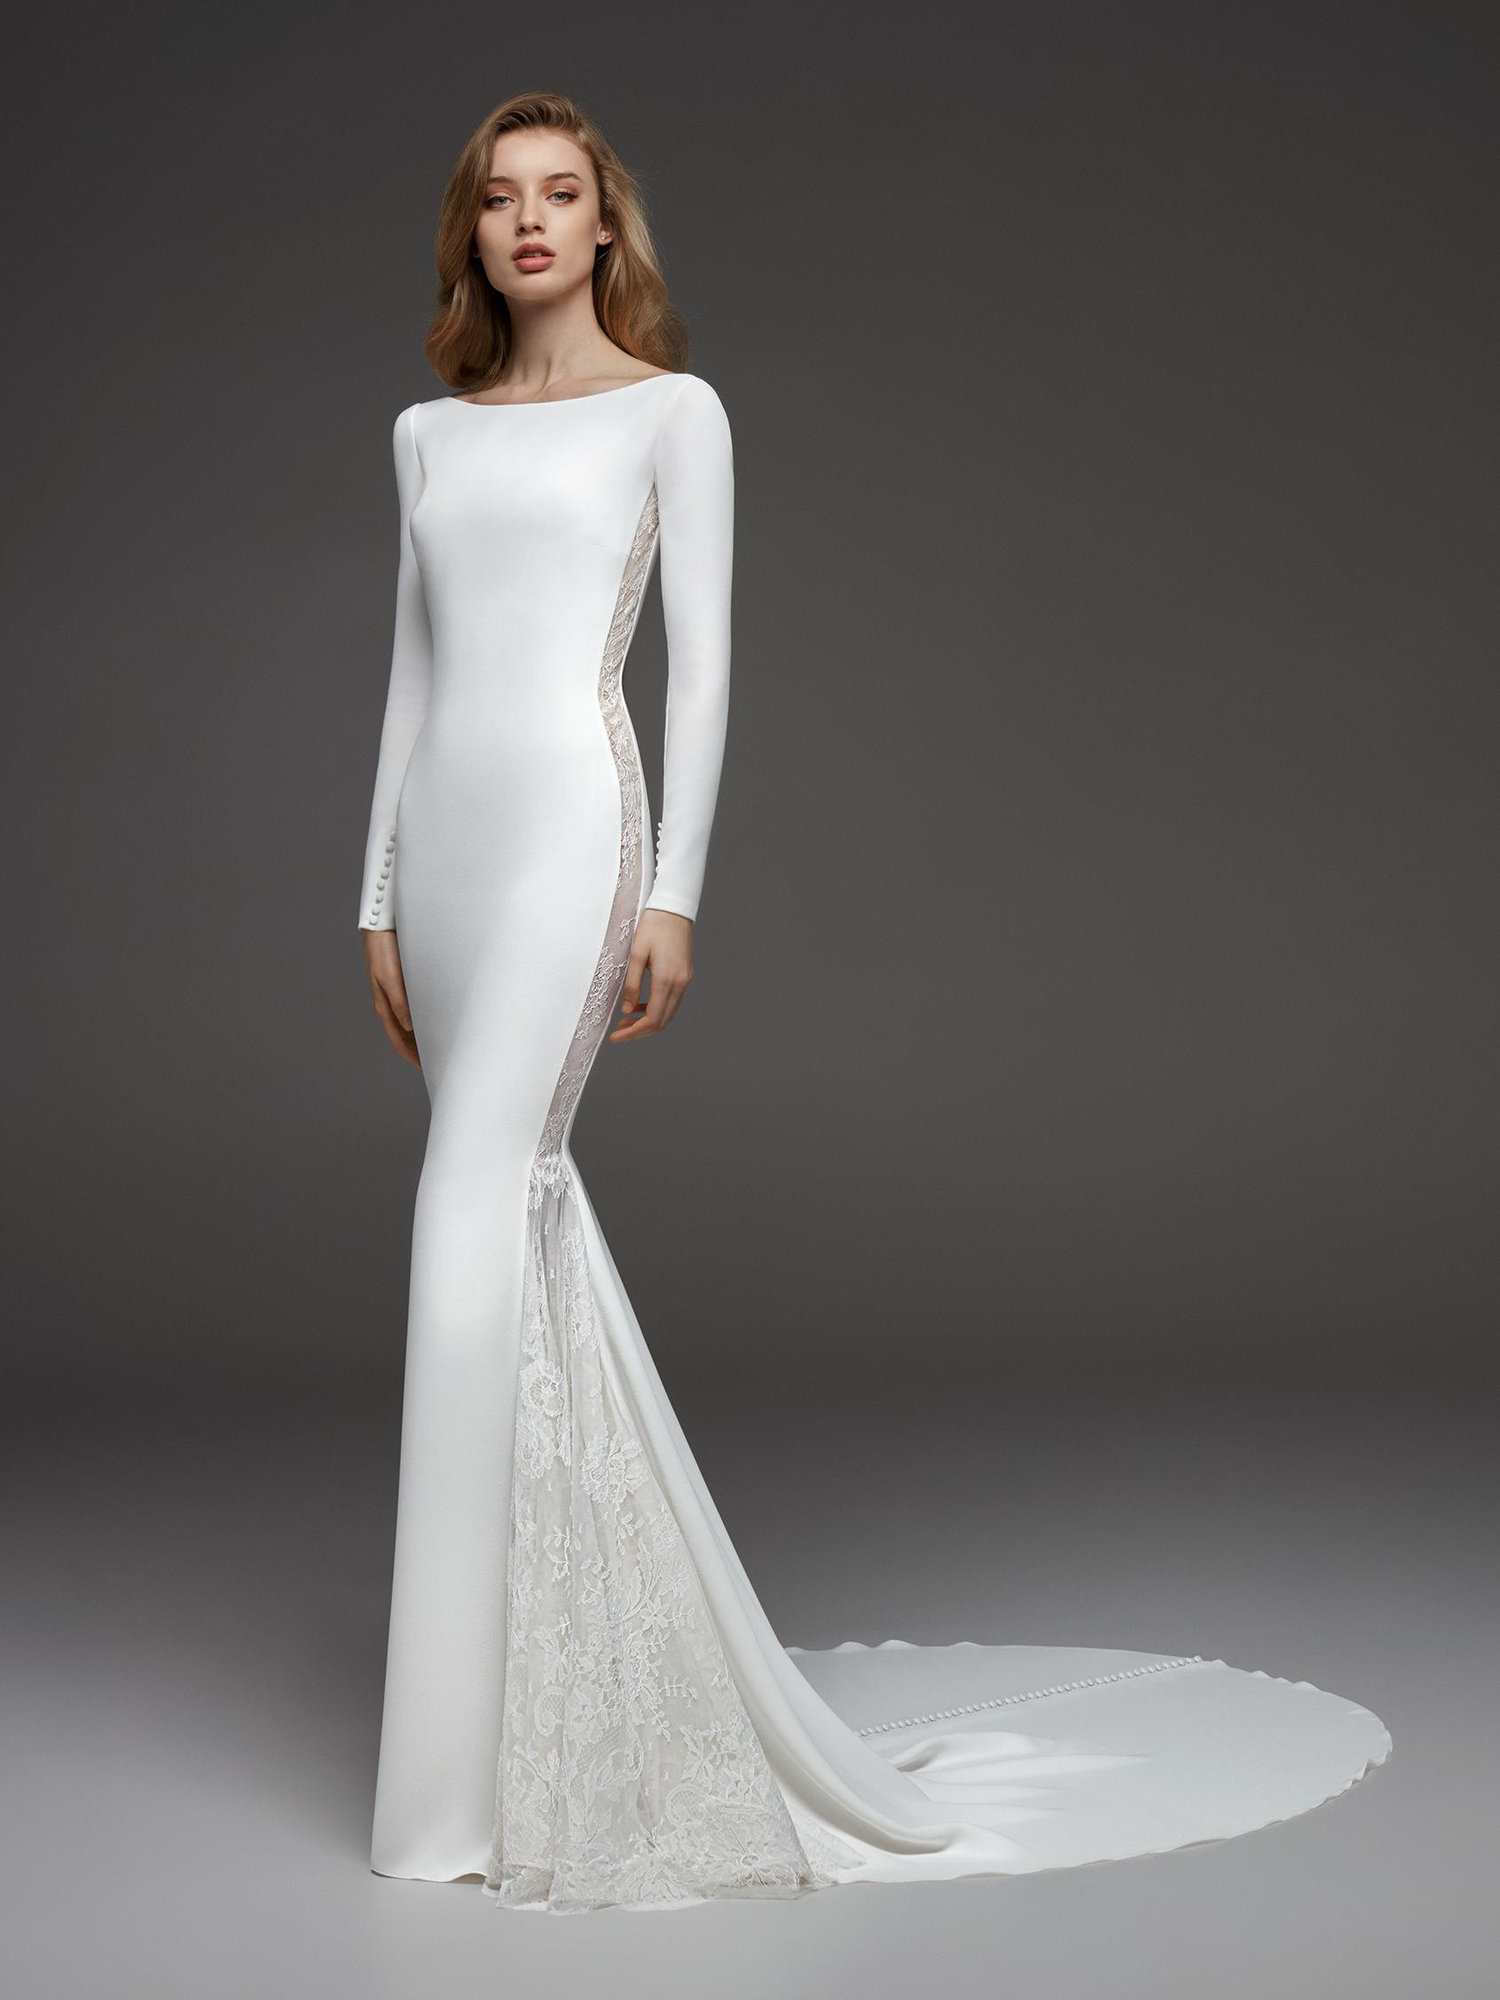 Top Bridal Trends of 2019 — Williams Event Group | Award-Winning ...